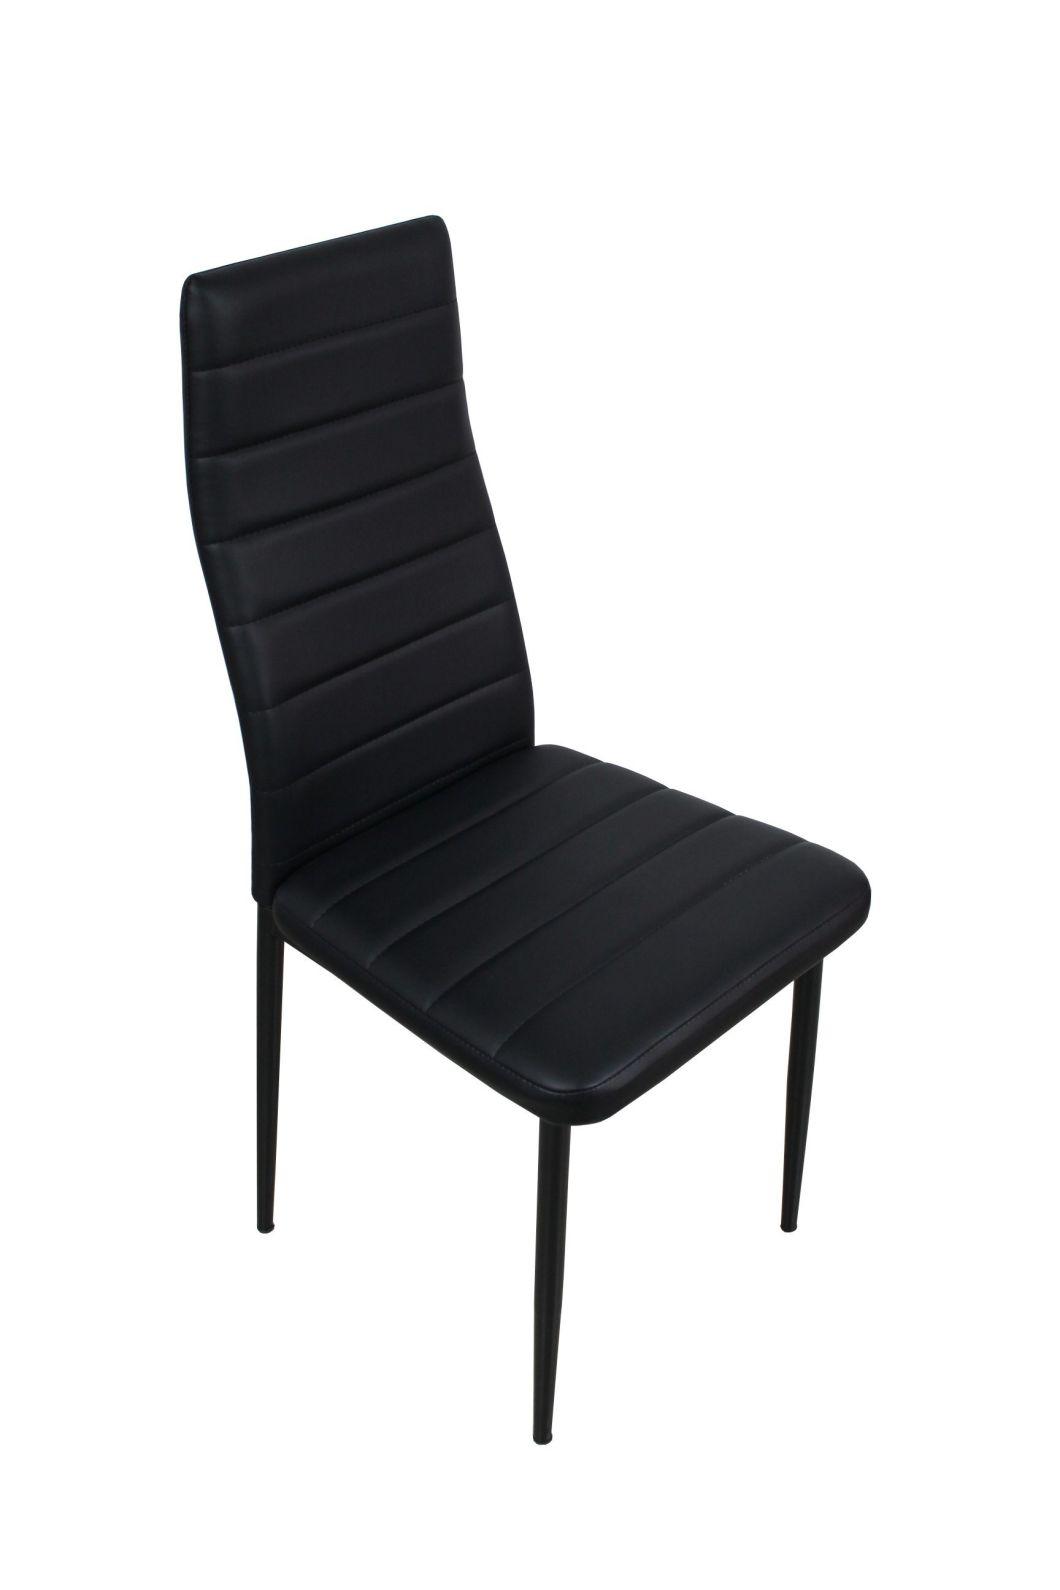 Modern Furniture Cheap PU Dining Chair with Steel Tube Legs